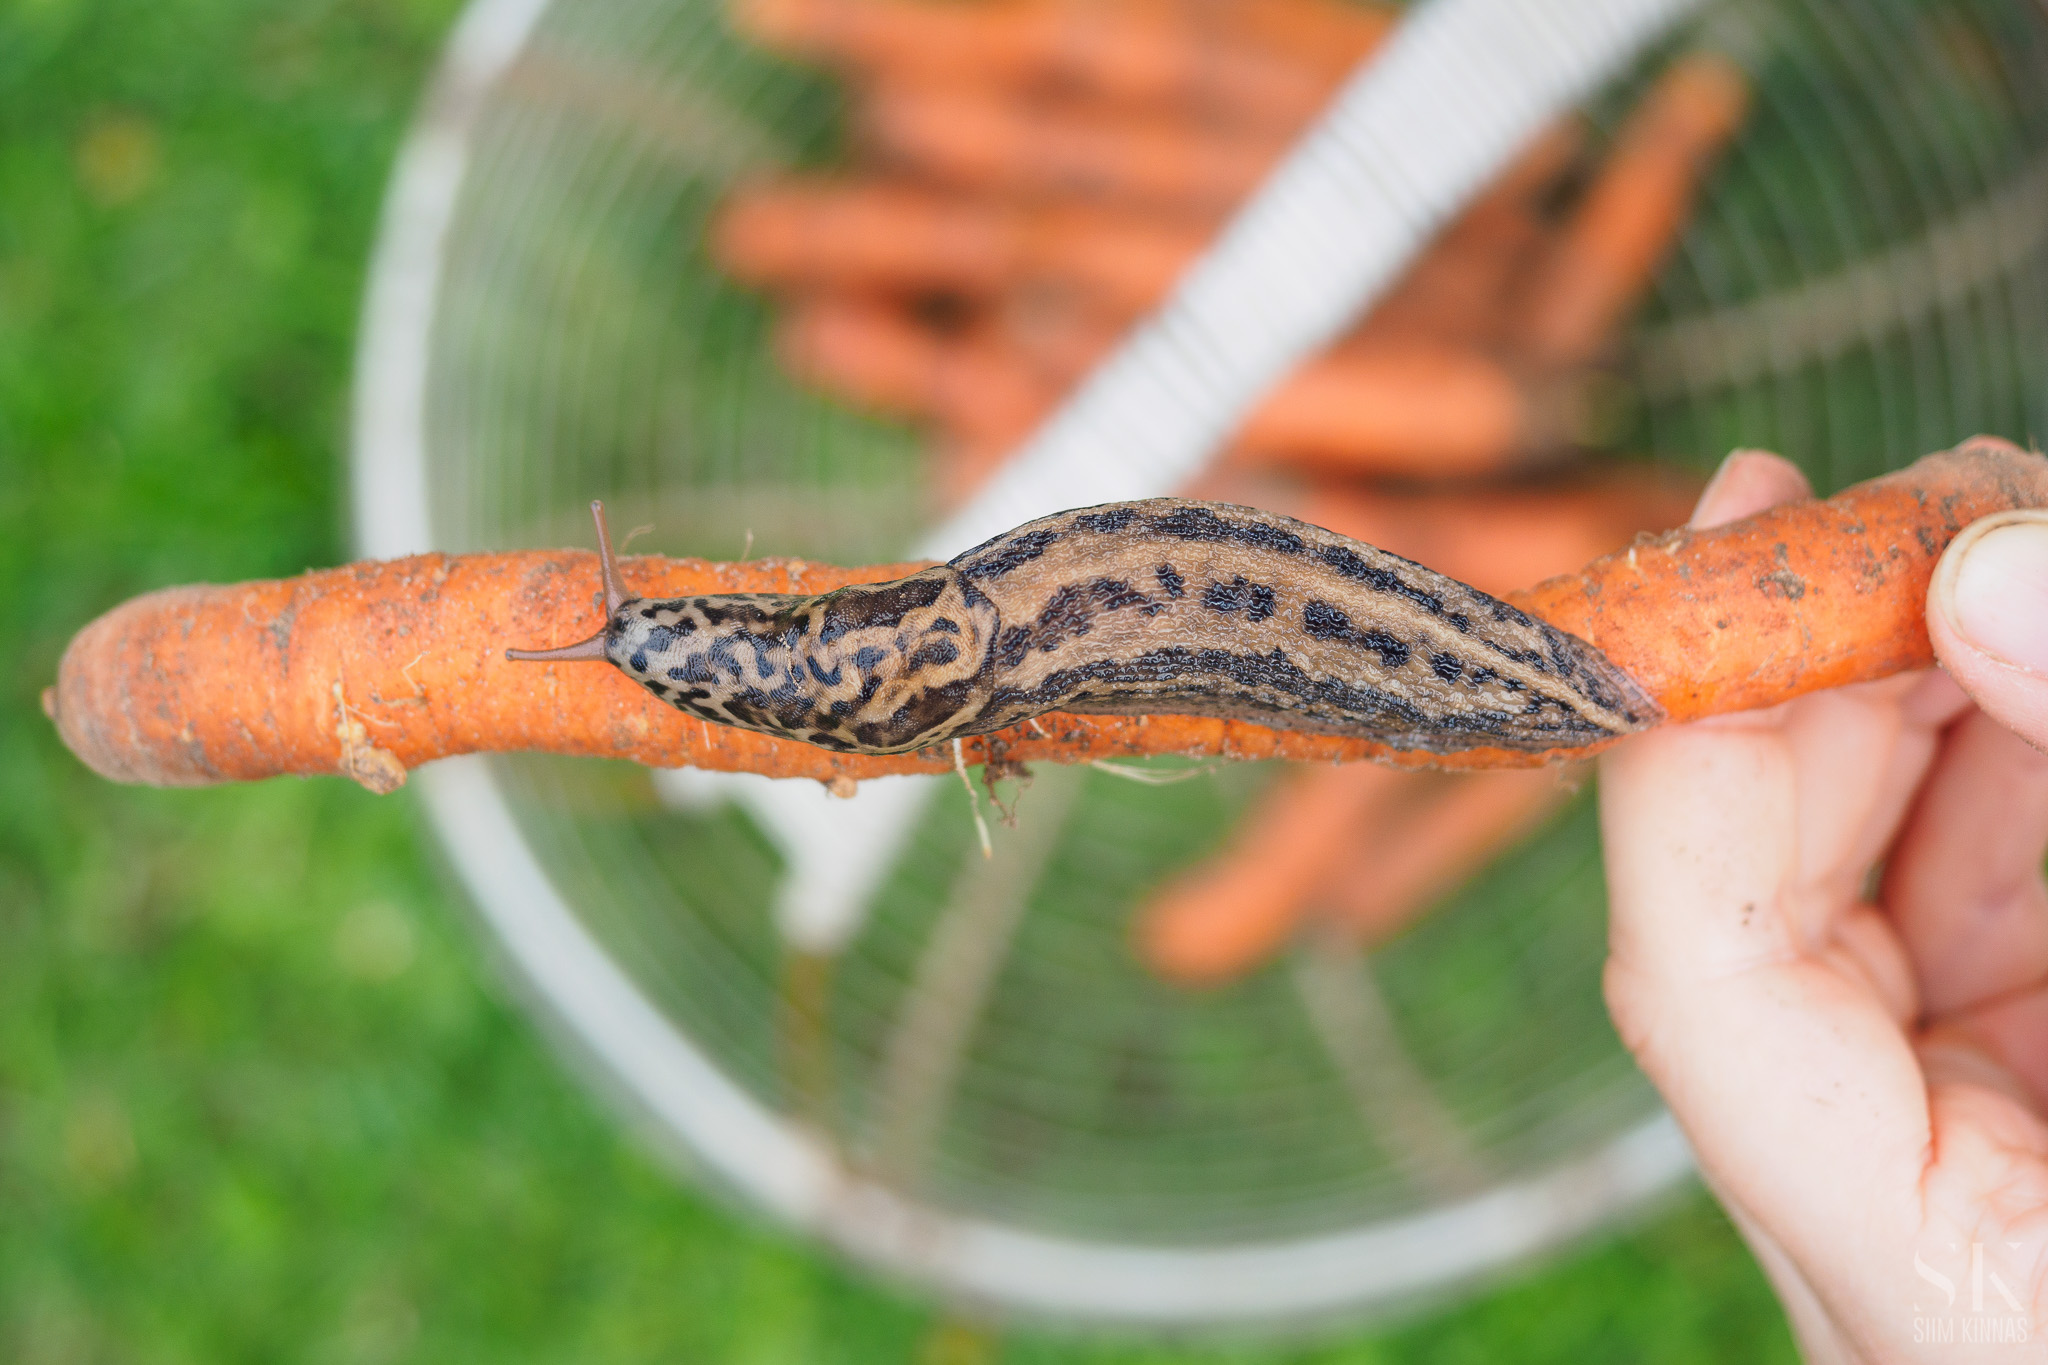 A giant slug on a carrot. Olympus Pen-F review